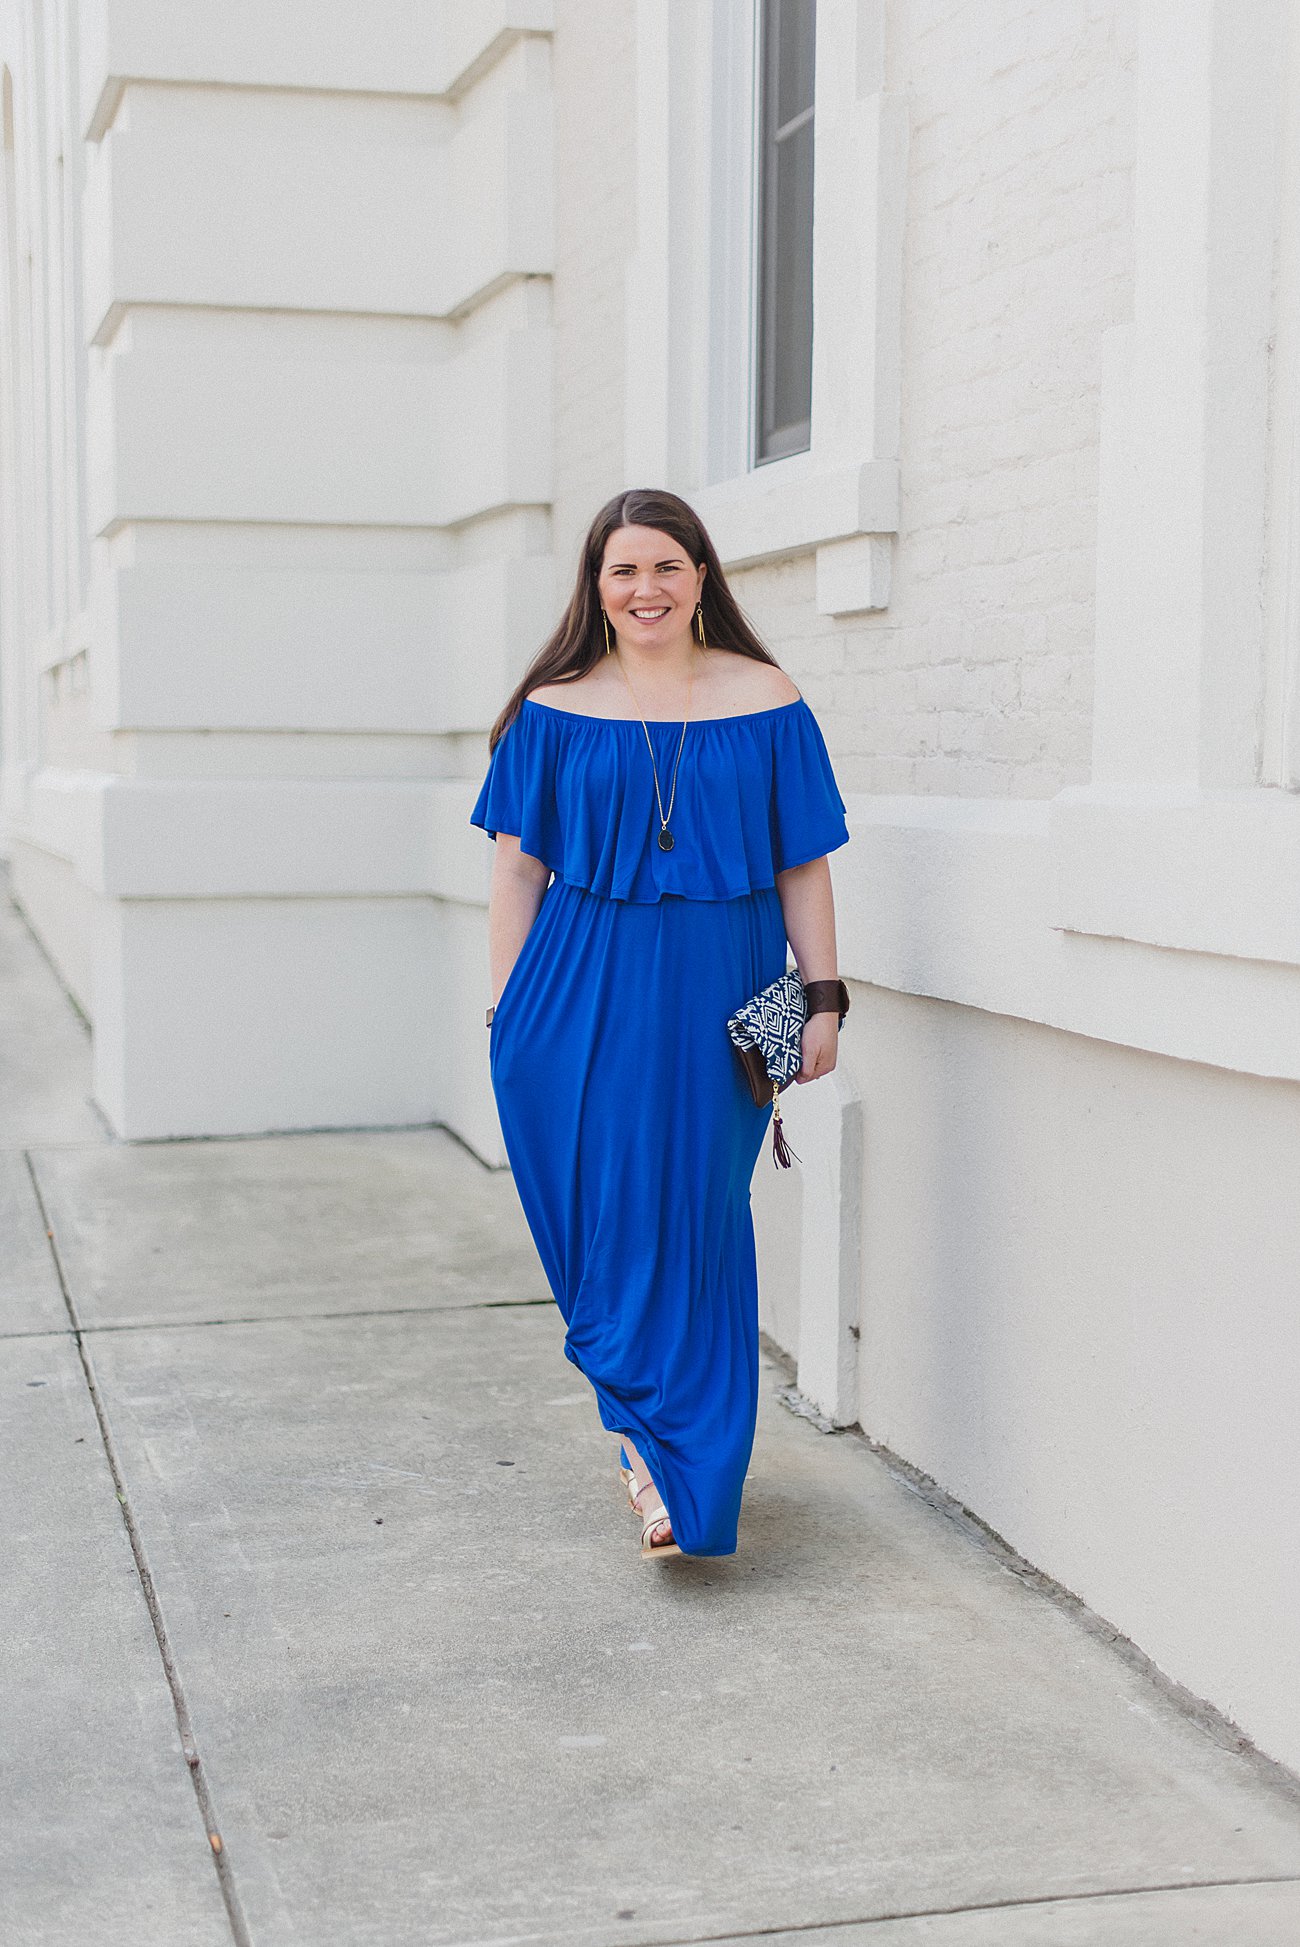 Ethical Fashion: How to Style an Off the Shoulder Maxi Dress